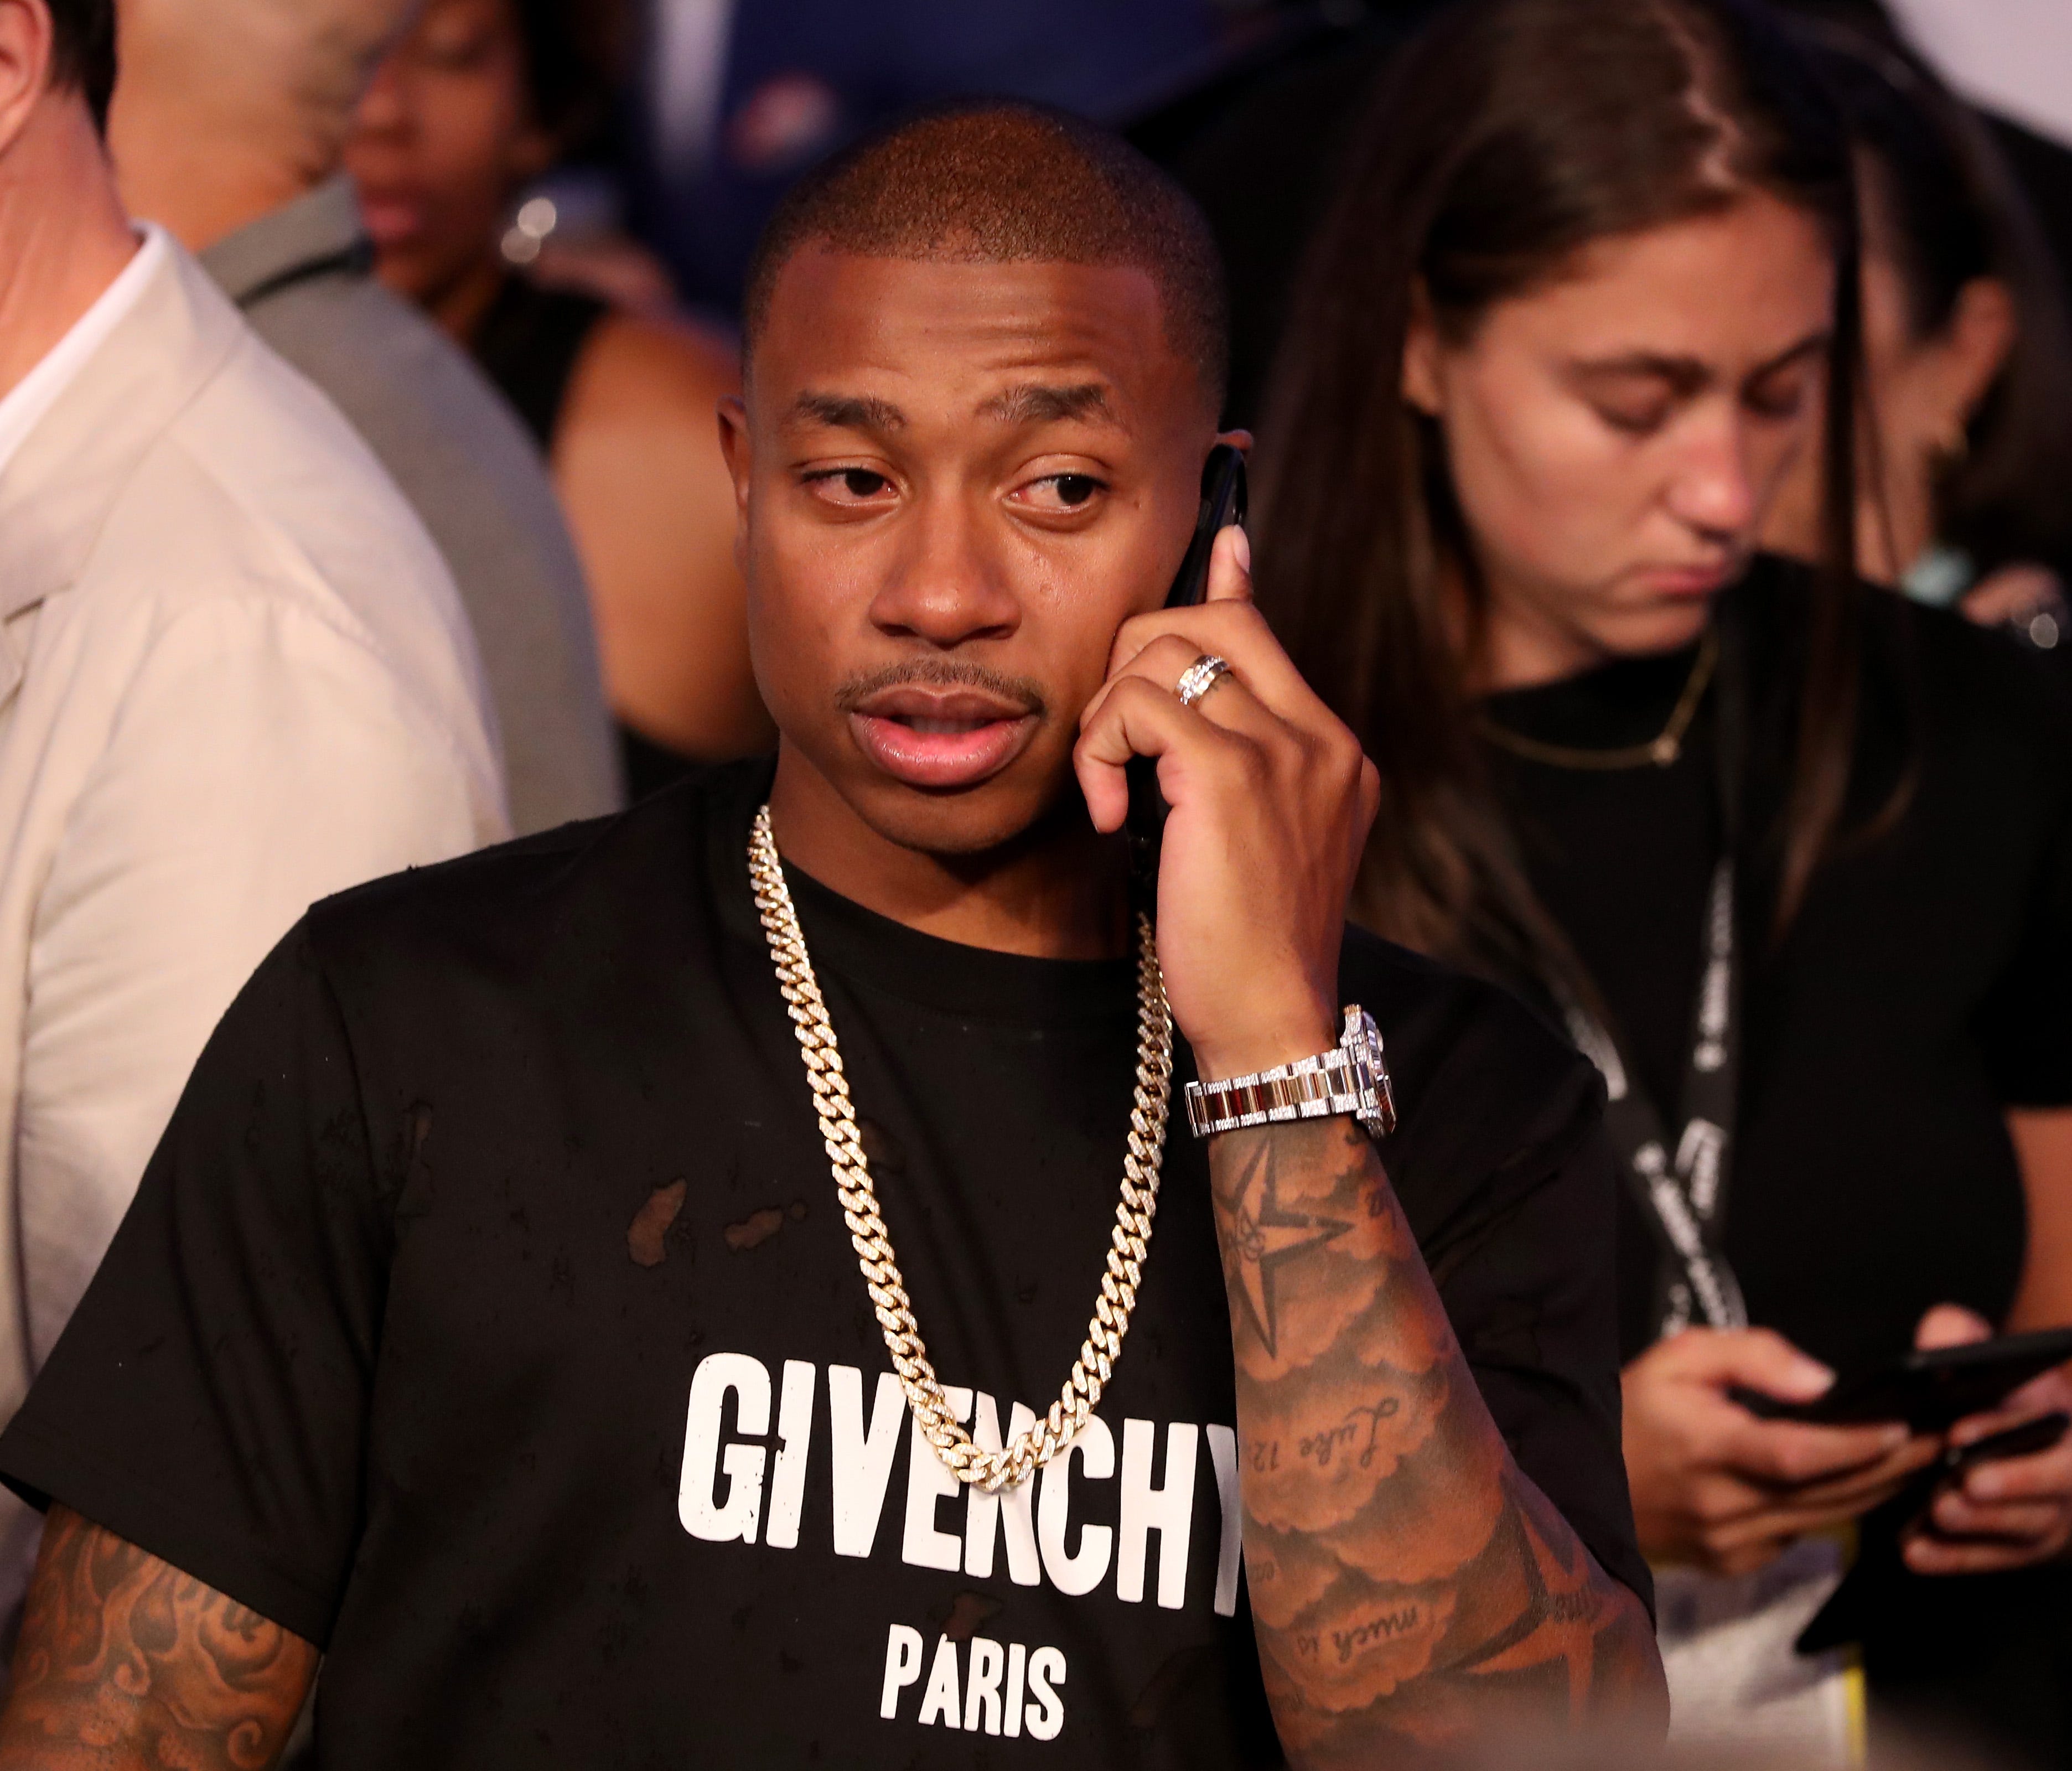 Isaiah Thomas attends the super welterweight boxing match between Floyd Mayweather Jr. and Conor McGregor.